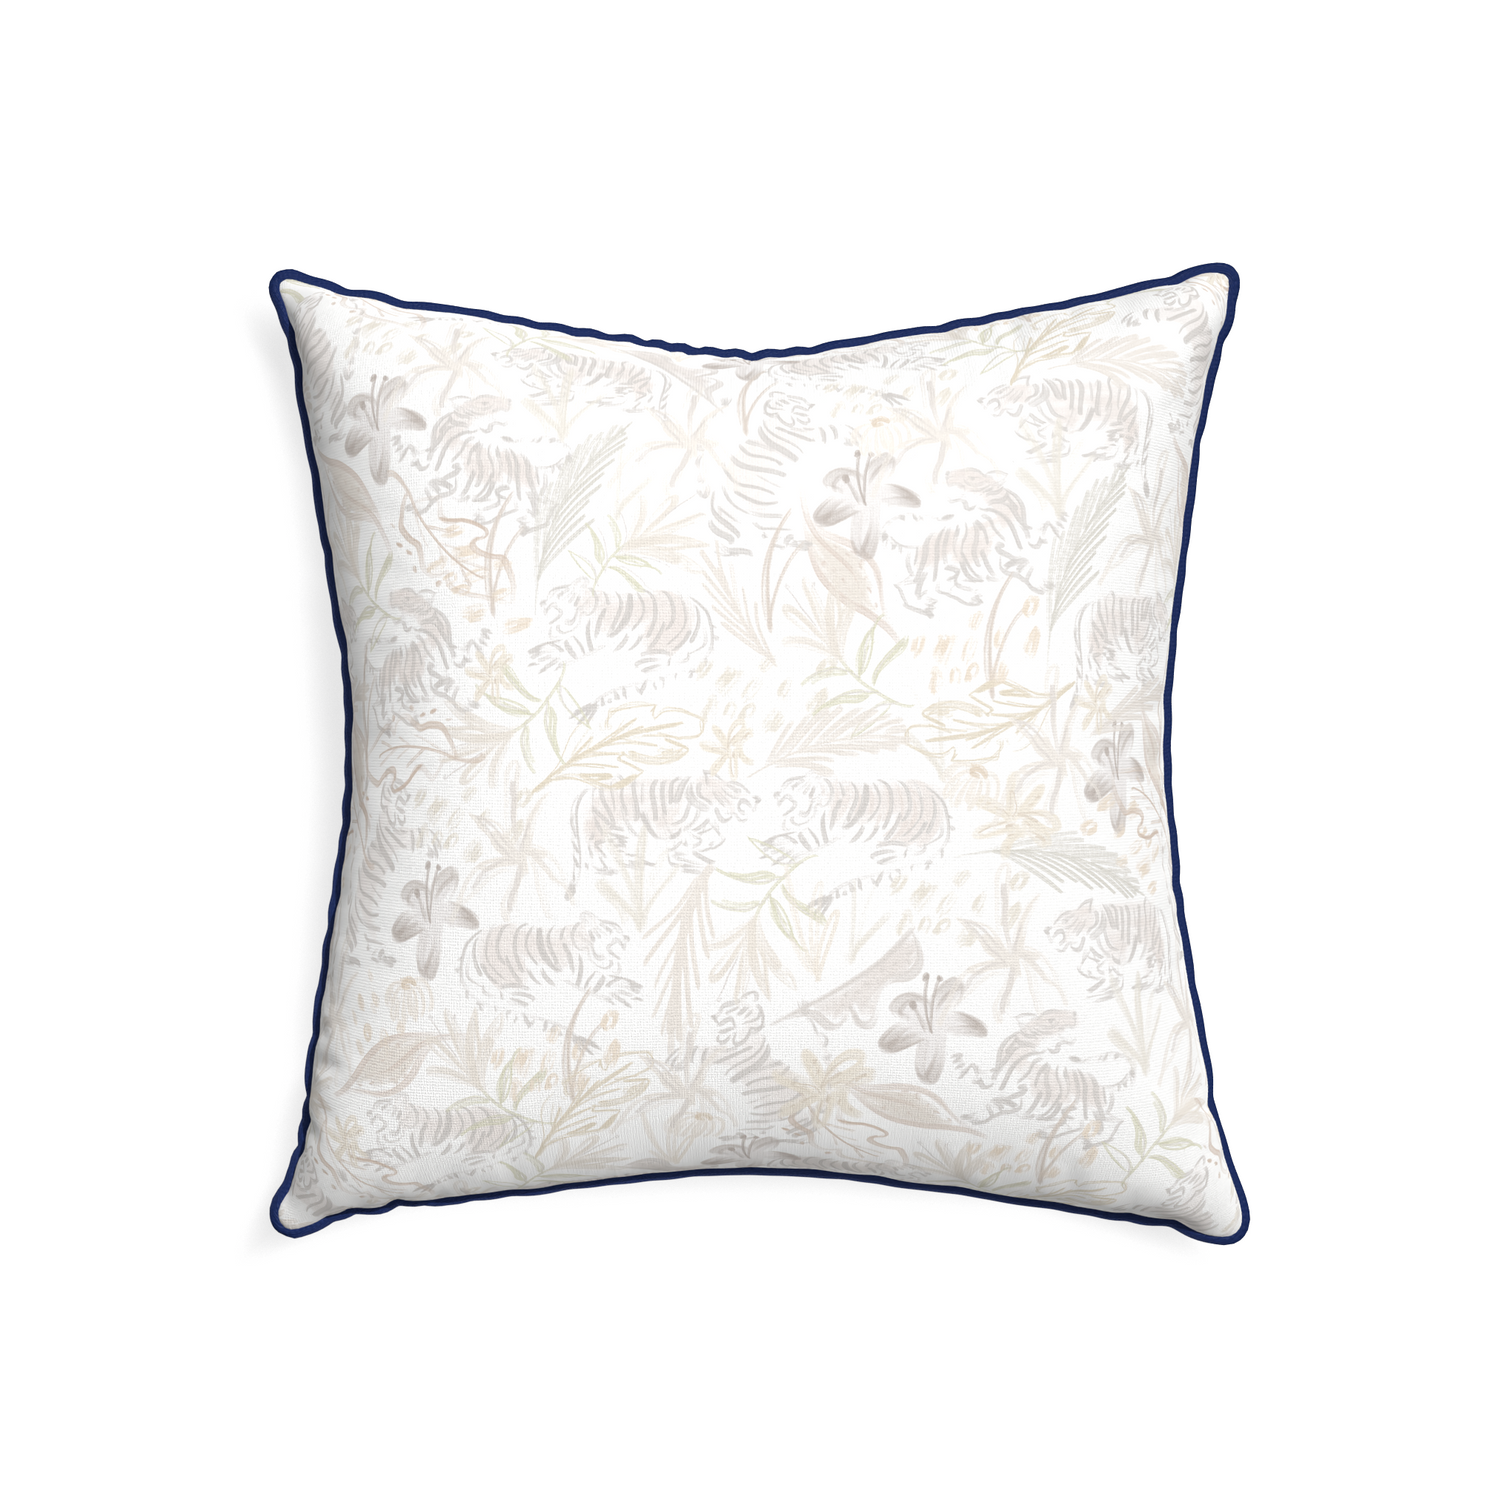 22-square frida sand custom beige chinoiserie tigerpillow with midnight piping on white background